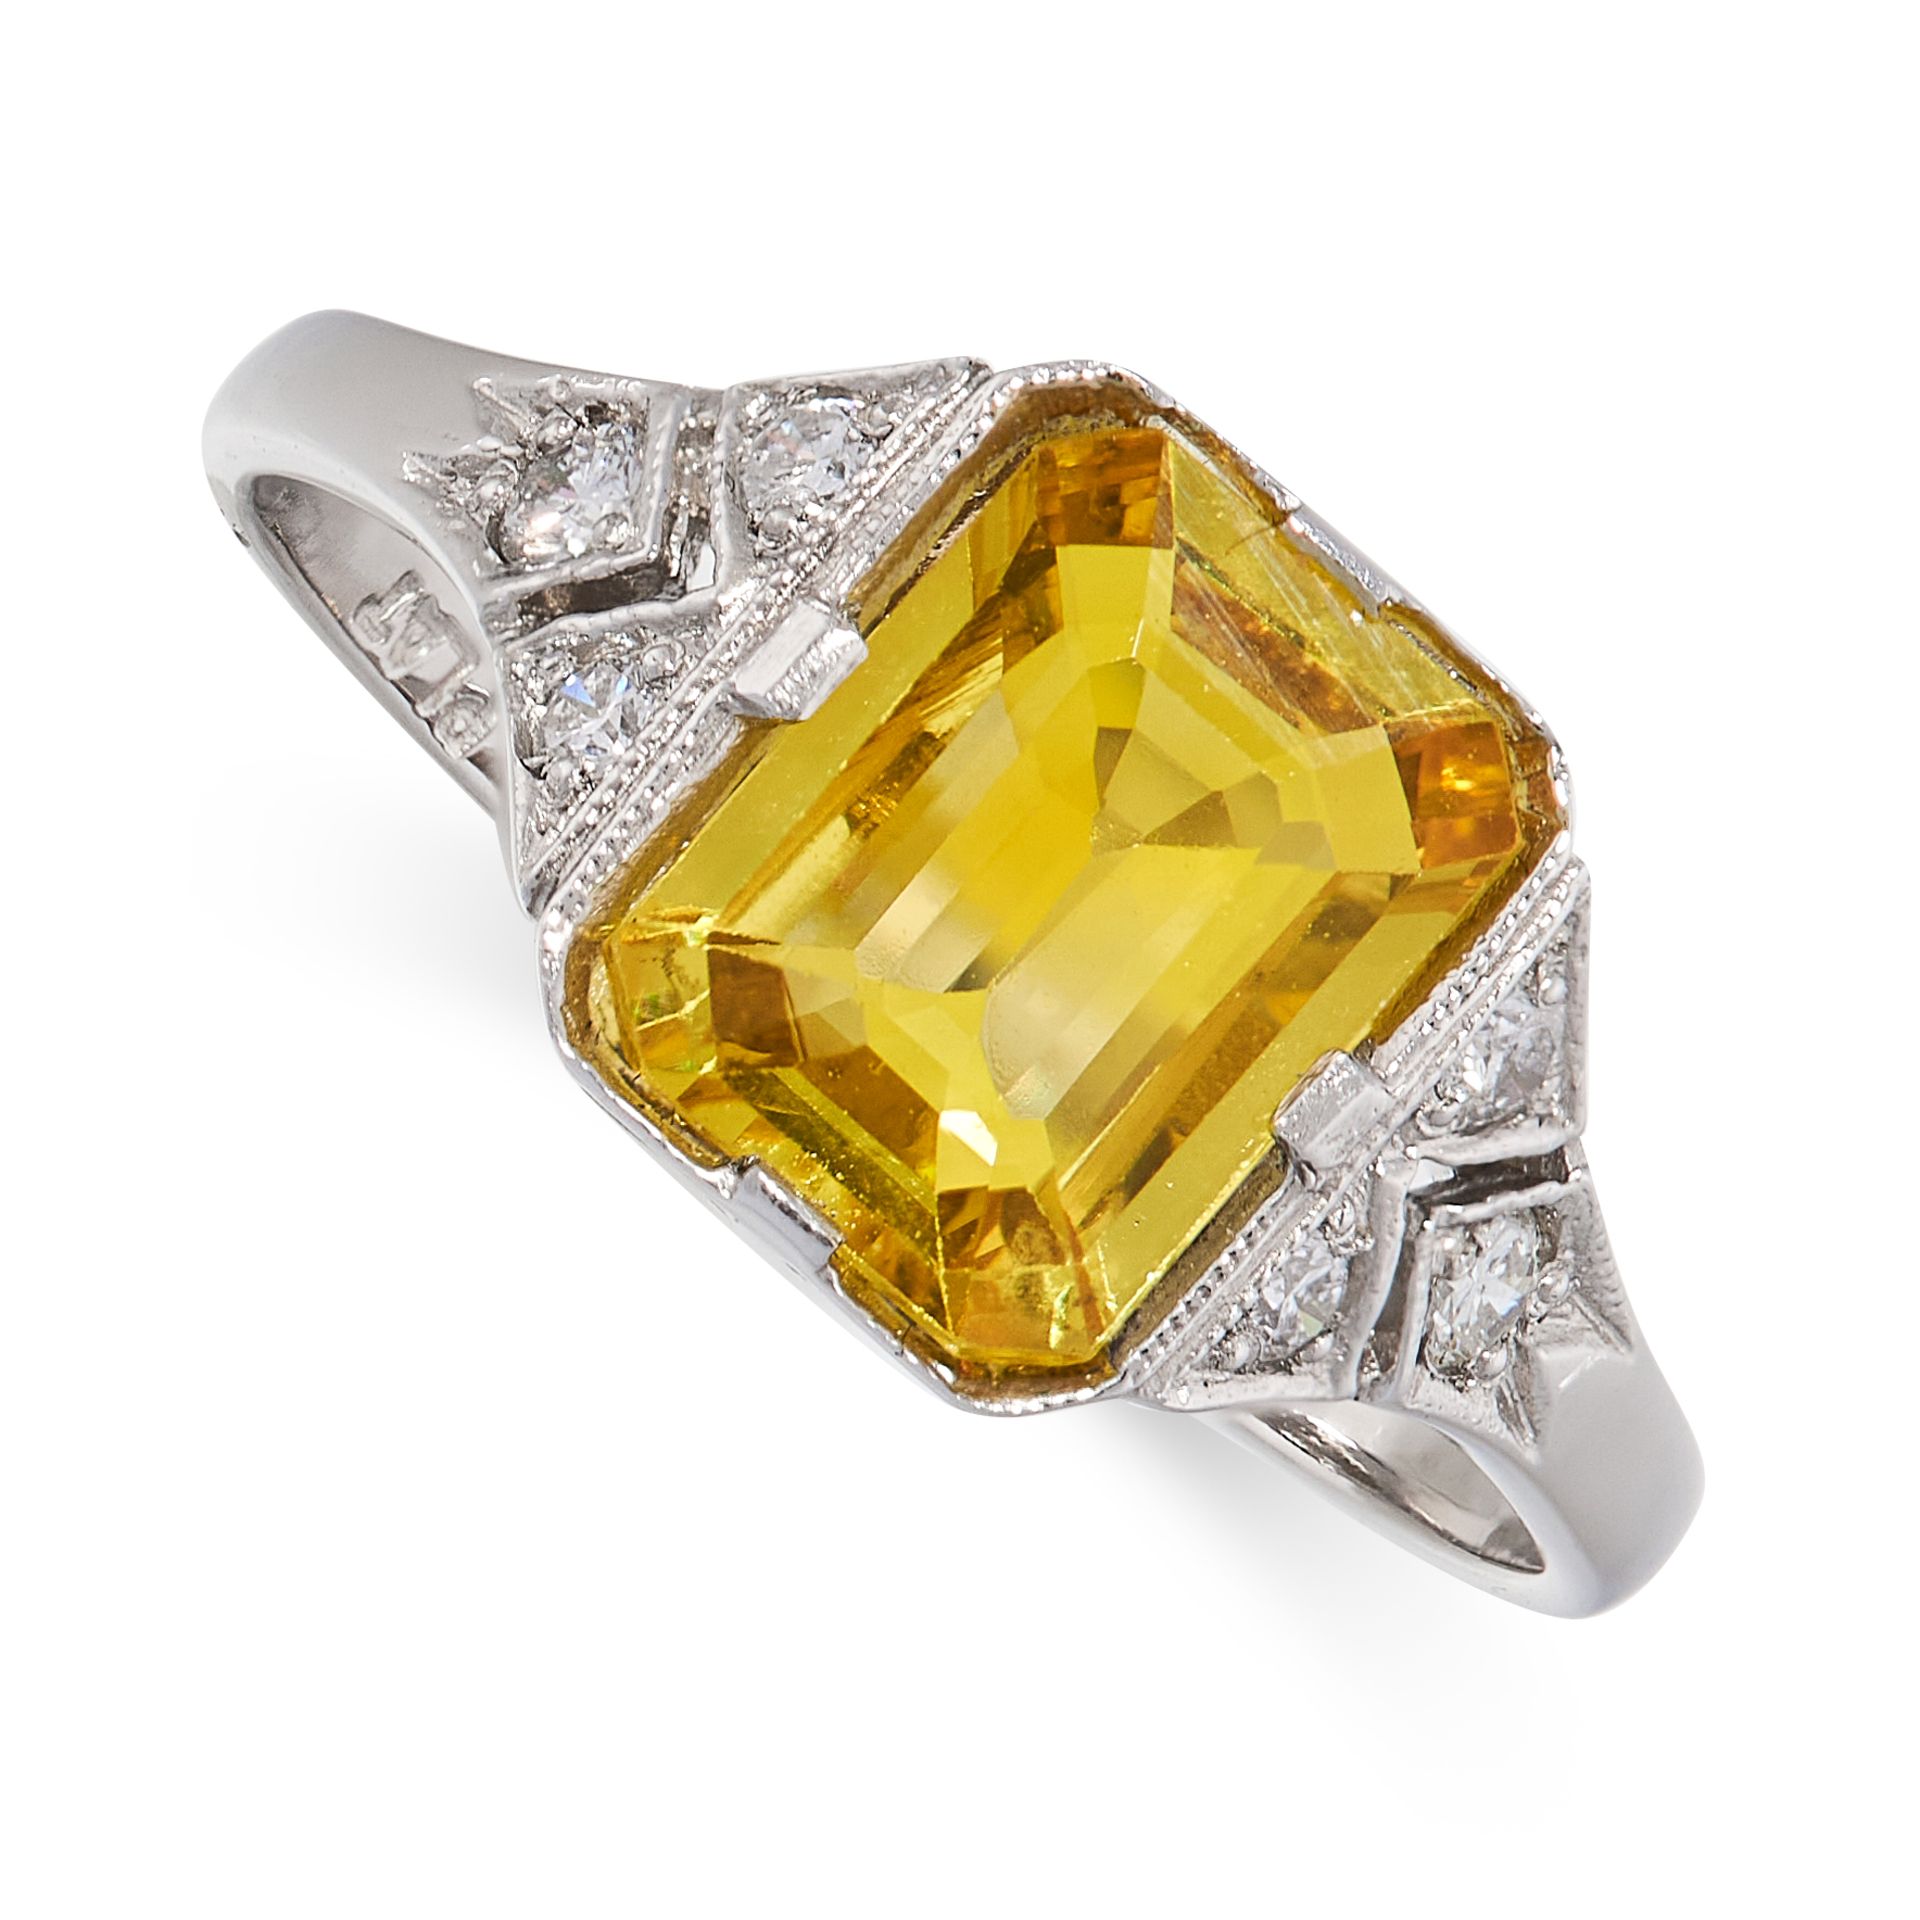 A YELLOW SAPPHIRE AND DIAMOND RING in platinum, set with an emerald cut yellow sapphire of 2.00